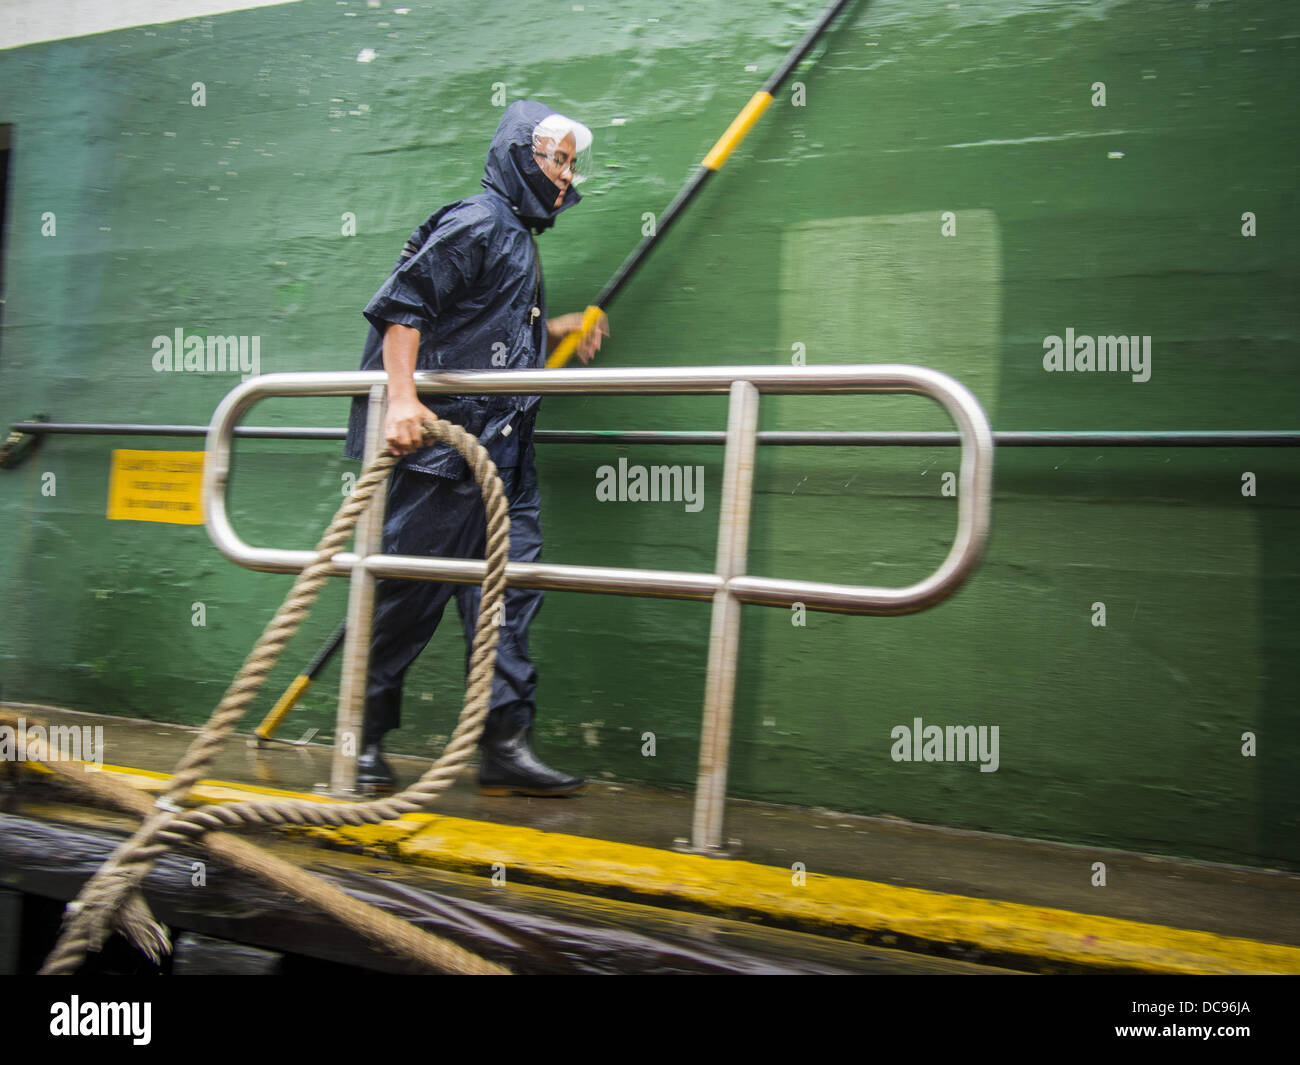 Hong Kong. 13th August 2013.  A Star Ferry worker pulls a rope from a Star Ferry ship to shore during Typhoon Utor in Hong Kong. Typhoon Utor (known in the Philippines as Typhoon Labuyo) is an active tropical cyclone located over the South China Sea. The eleventh named storm and second typhoon of the 2013 typhoon season, Utor formed from a tropical depression on August 8. The depression was upgraded to Tropical Storm Utor the following day, and to typhoon intensity just a few hours afterwards. Credit:  ZUMA Press, Inc./Alamy Live News Stock Photo